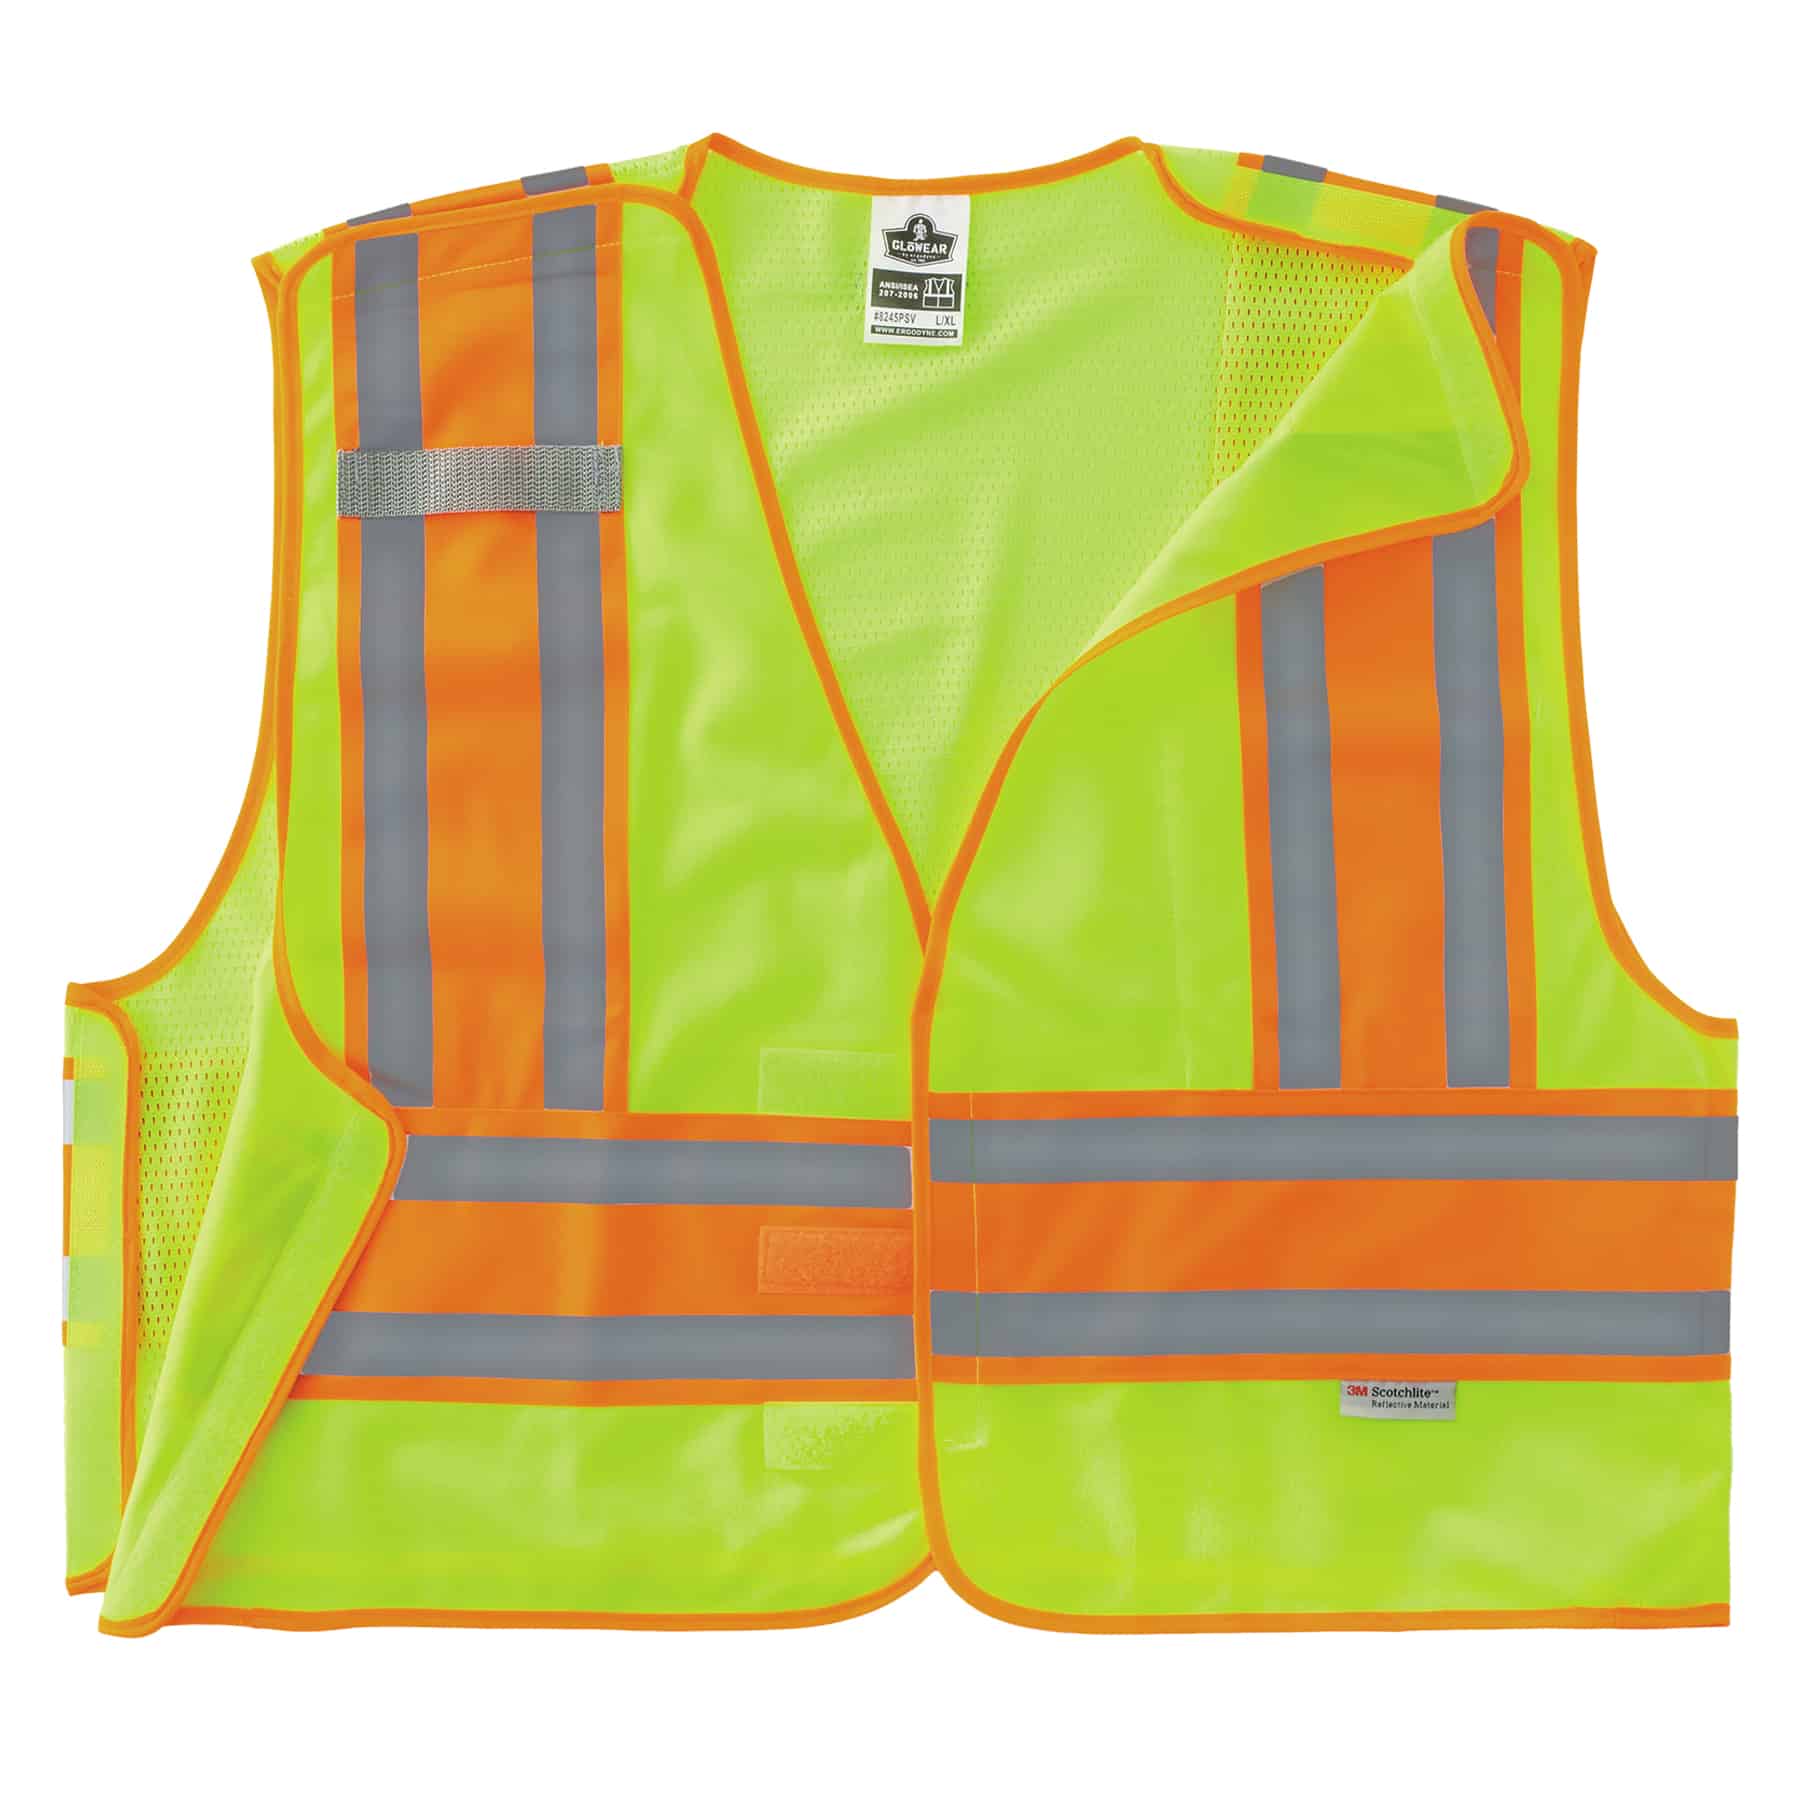 https://www.ergodyne.com/sites/default/files/product-images/23393-8245psv-type-p-class-2-public-safety-vest-lime-front-hook-and-loop.jpg